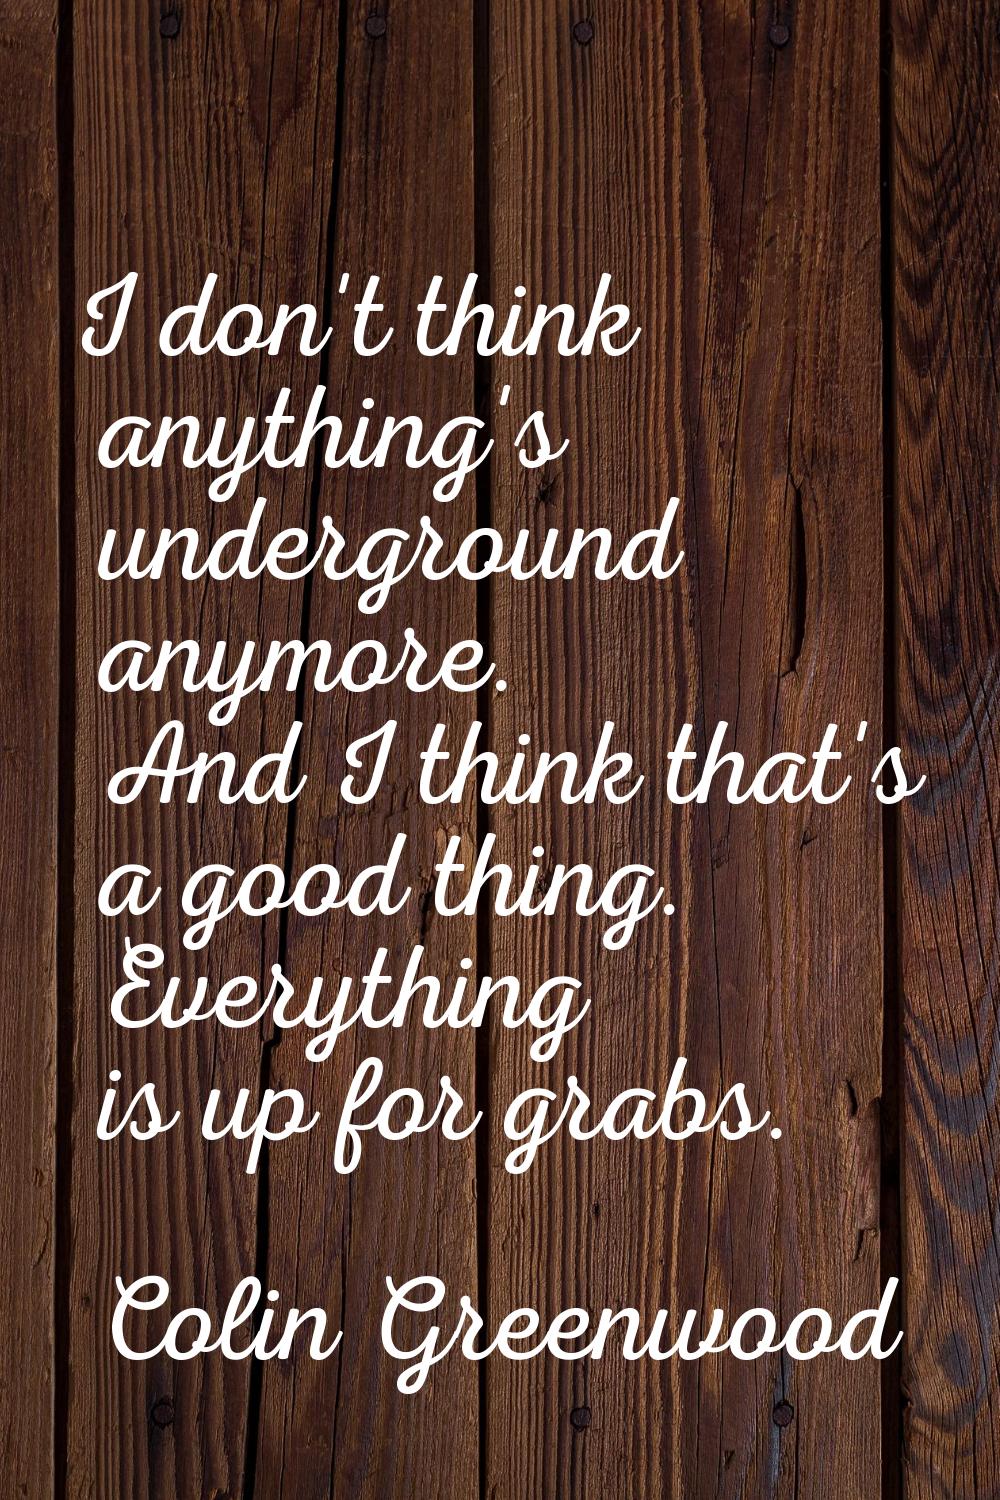 I don't think anything's underground anymore. And I think that's a good thing. Everything is up for